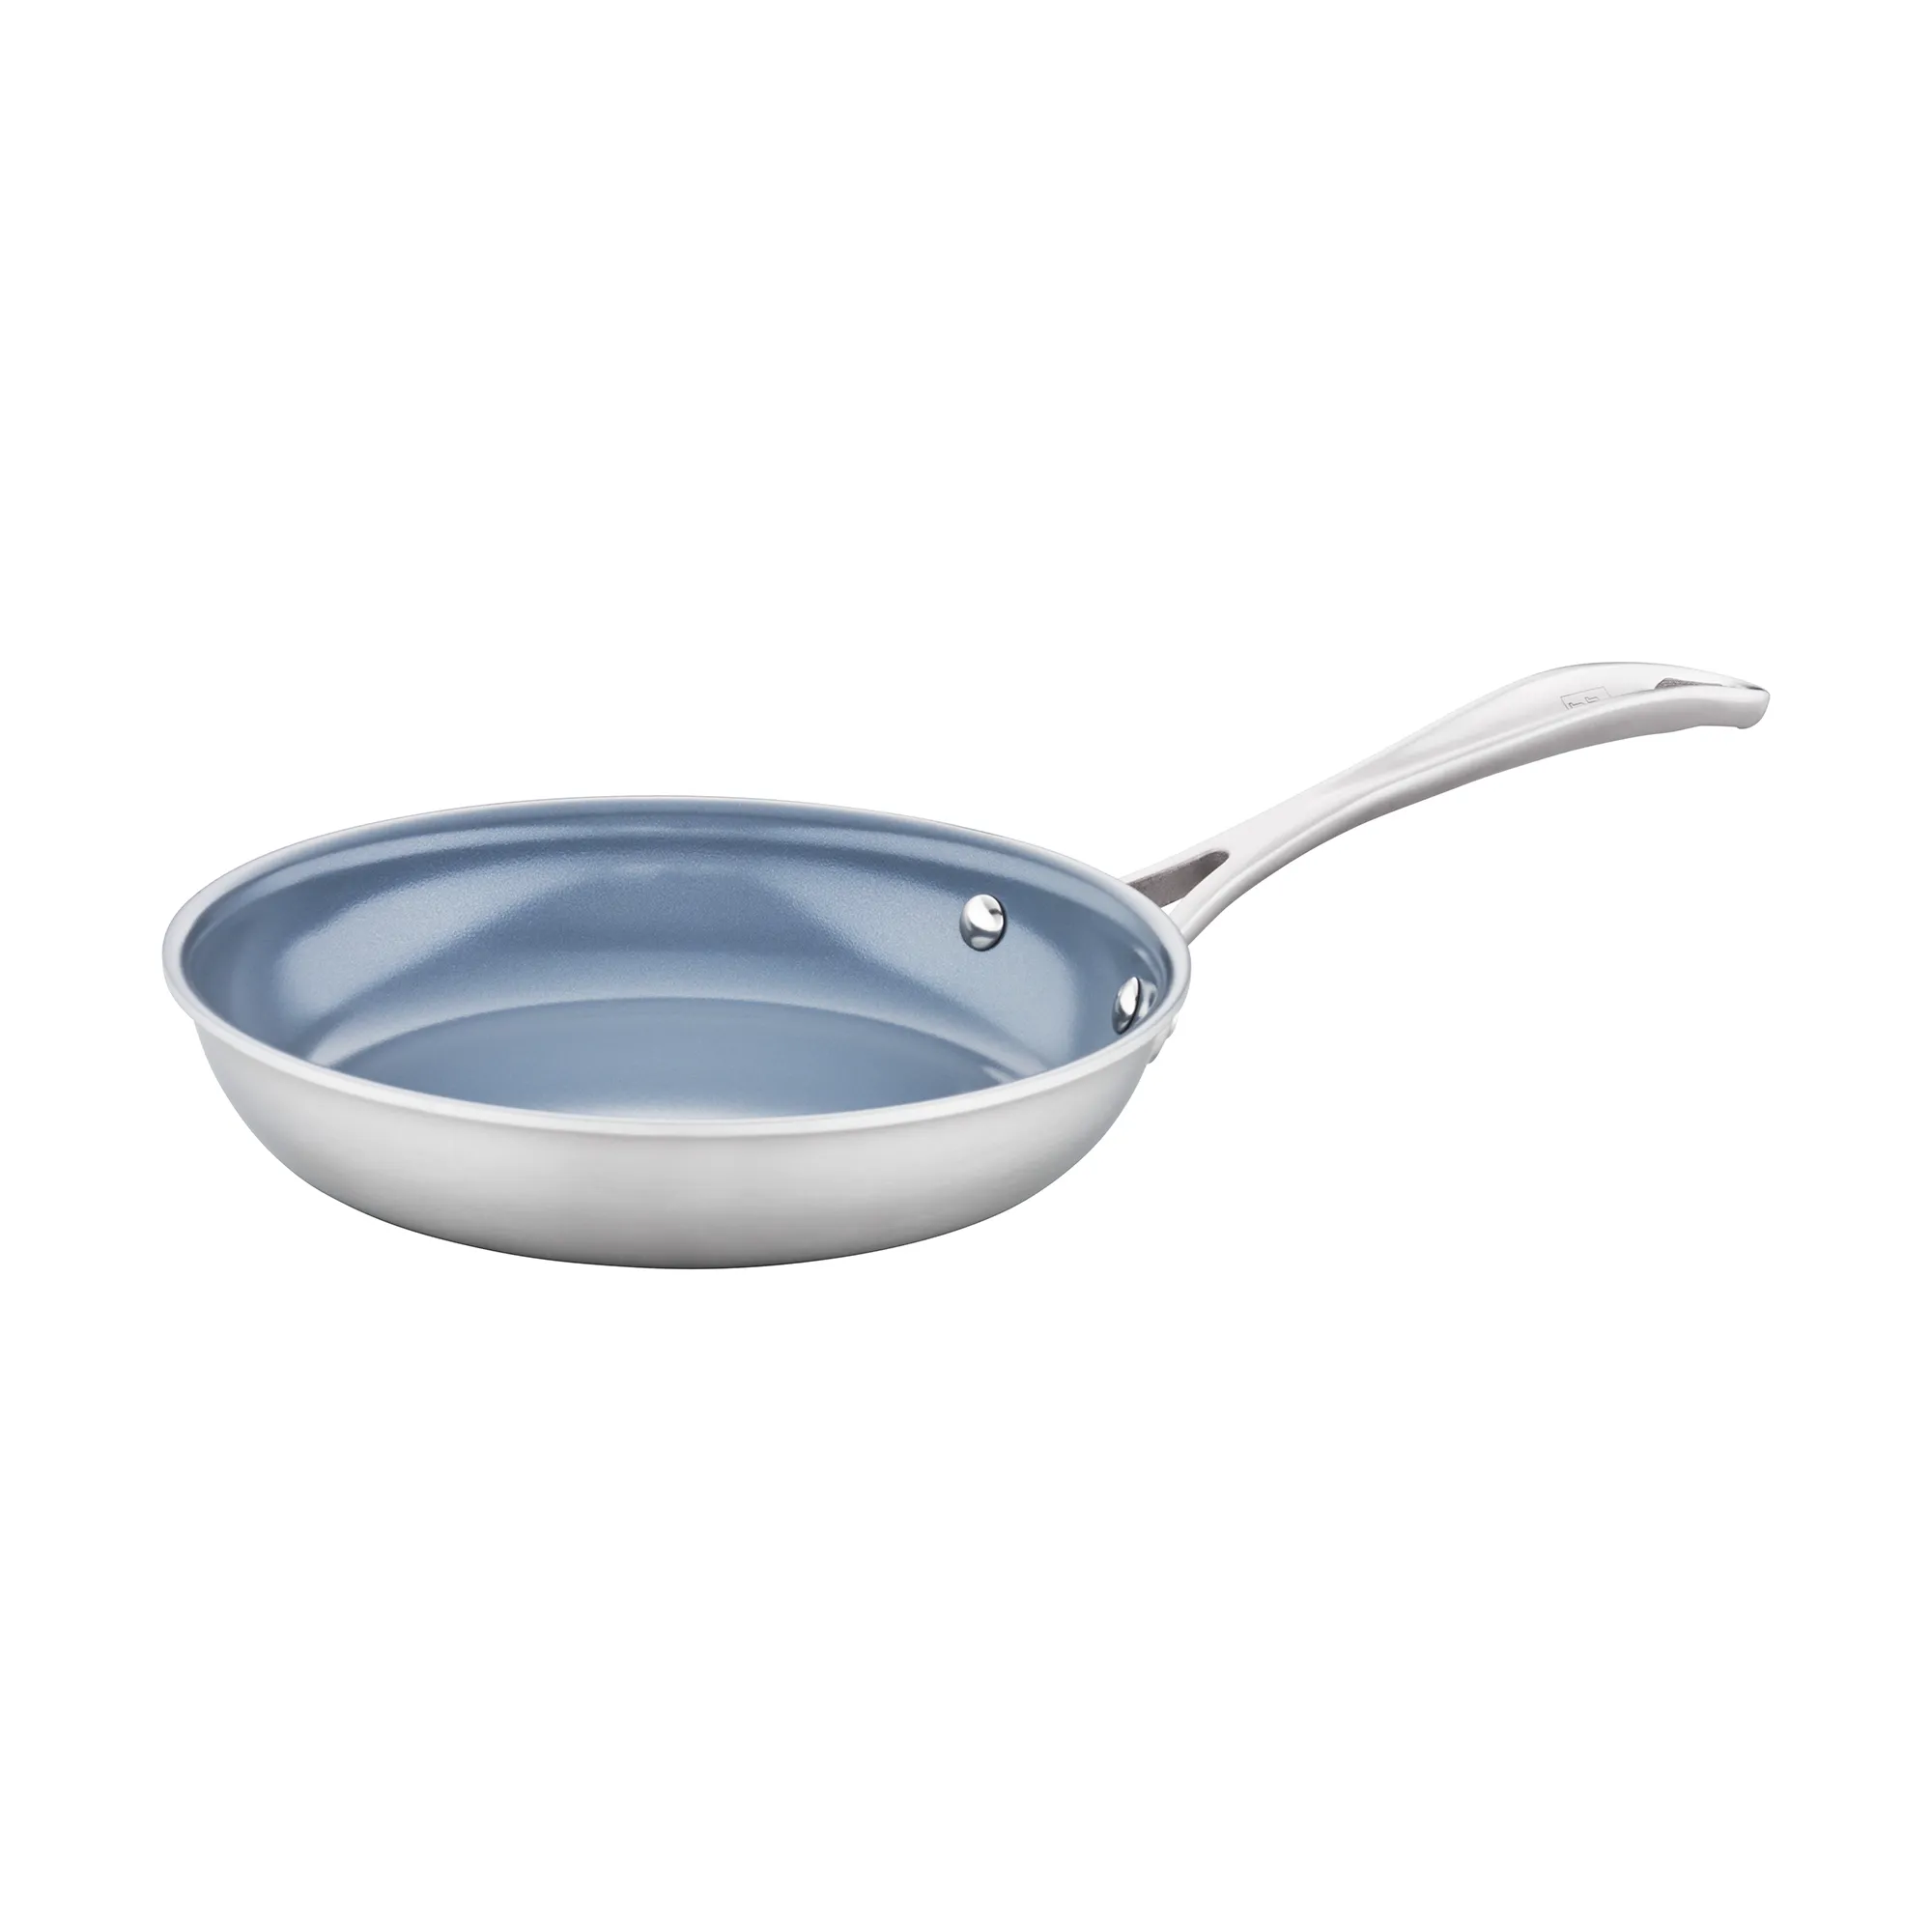 Zwilling Spirit 3-Ply 8-Inch Stainless Steel Ceramic Nonstick Fry Pan